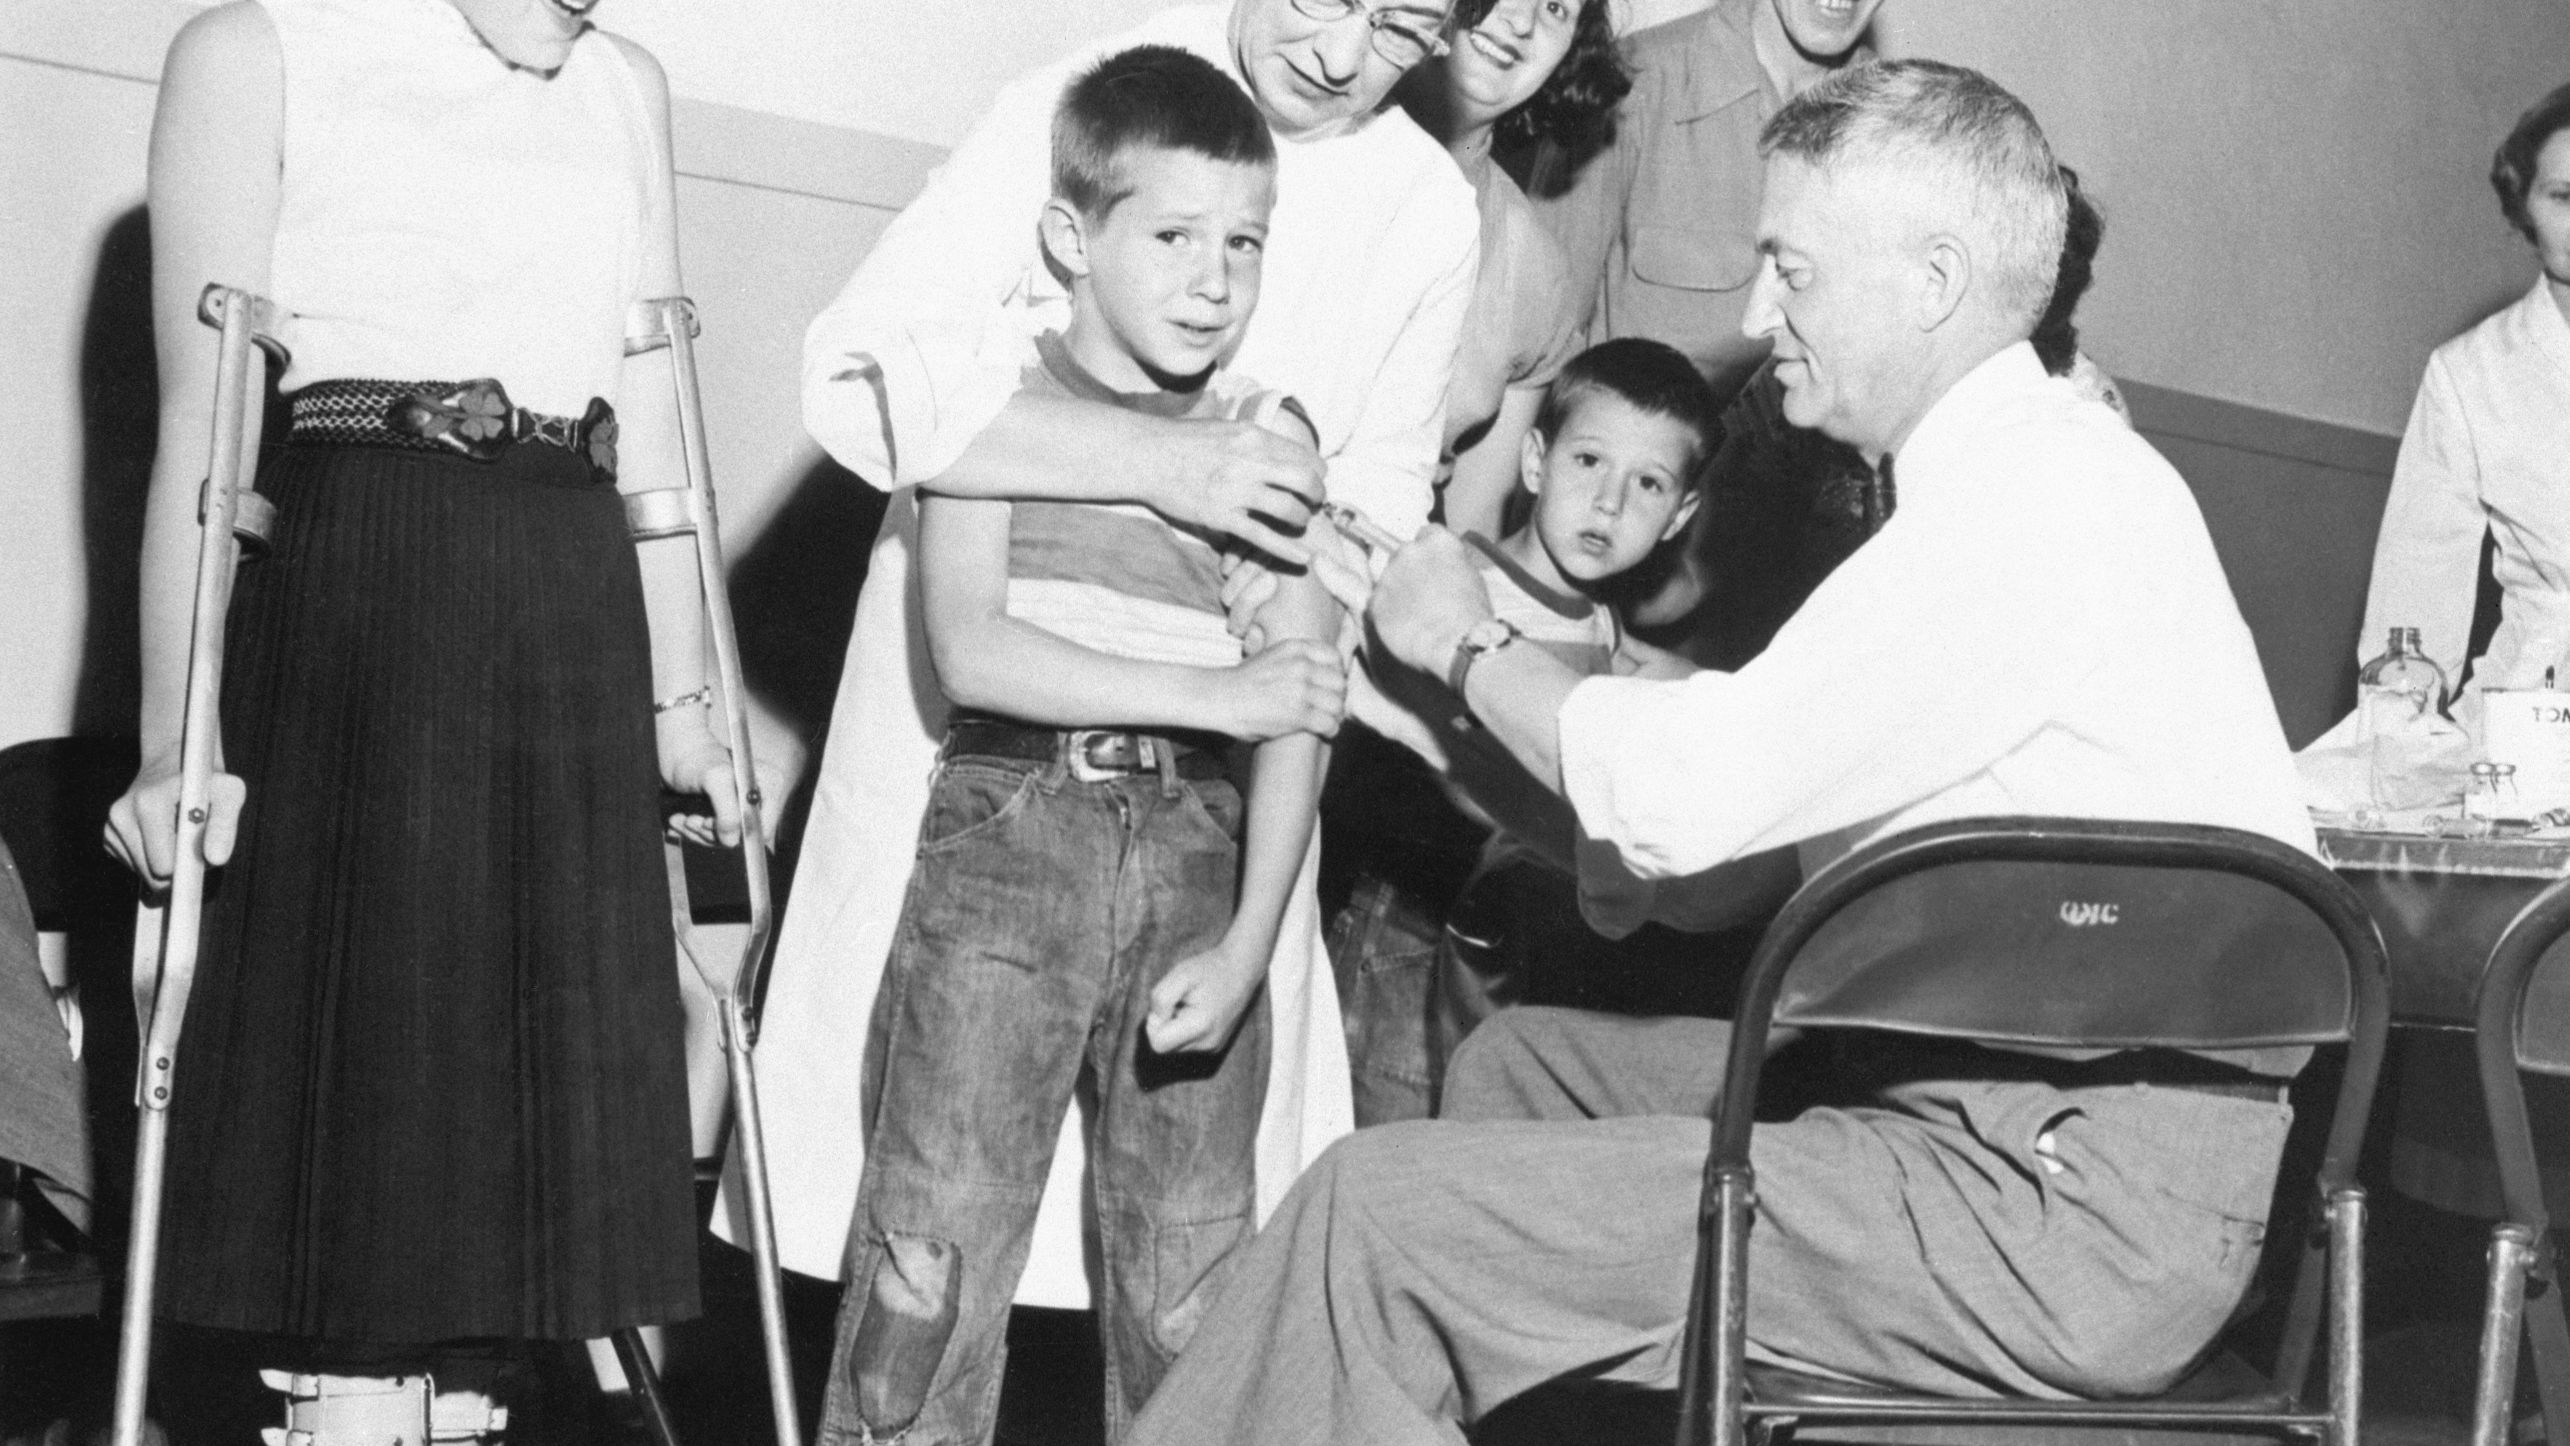 Dr. William Burgoyne gives a shot of the Salk polio vaccine to Michael Urnezis, 6, in 1955 in San Diego.